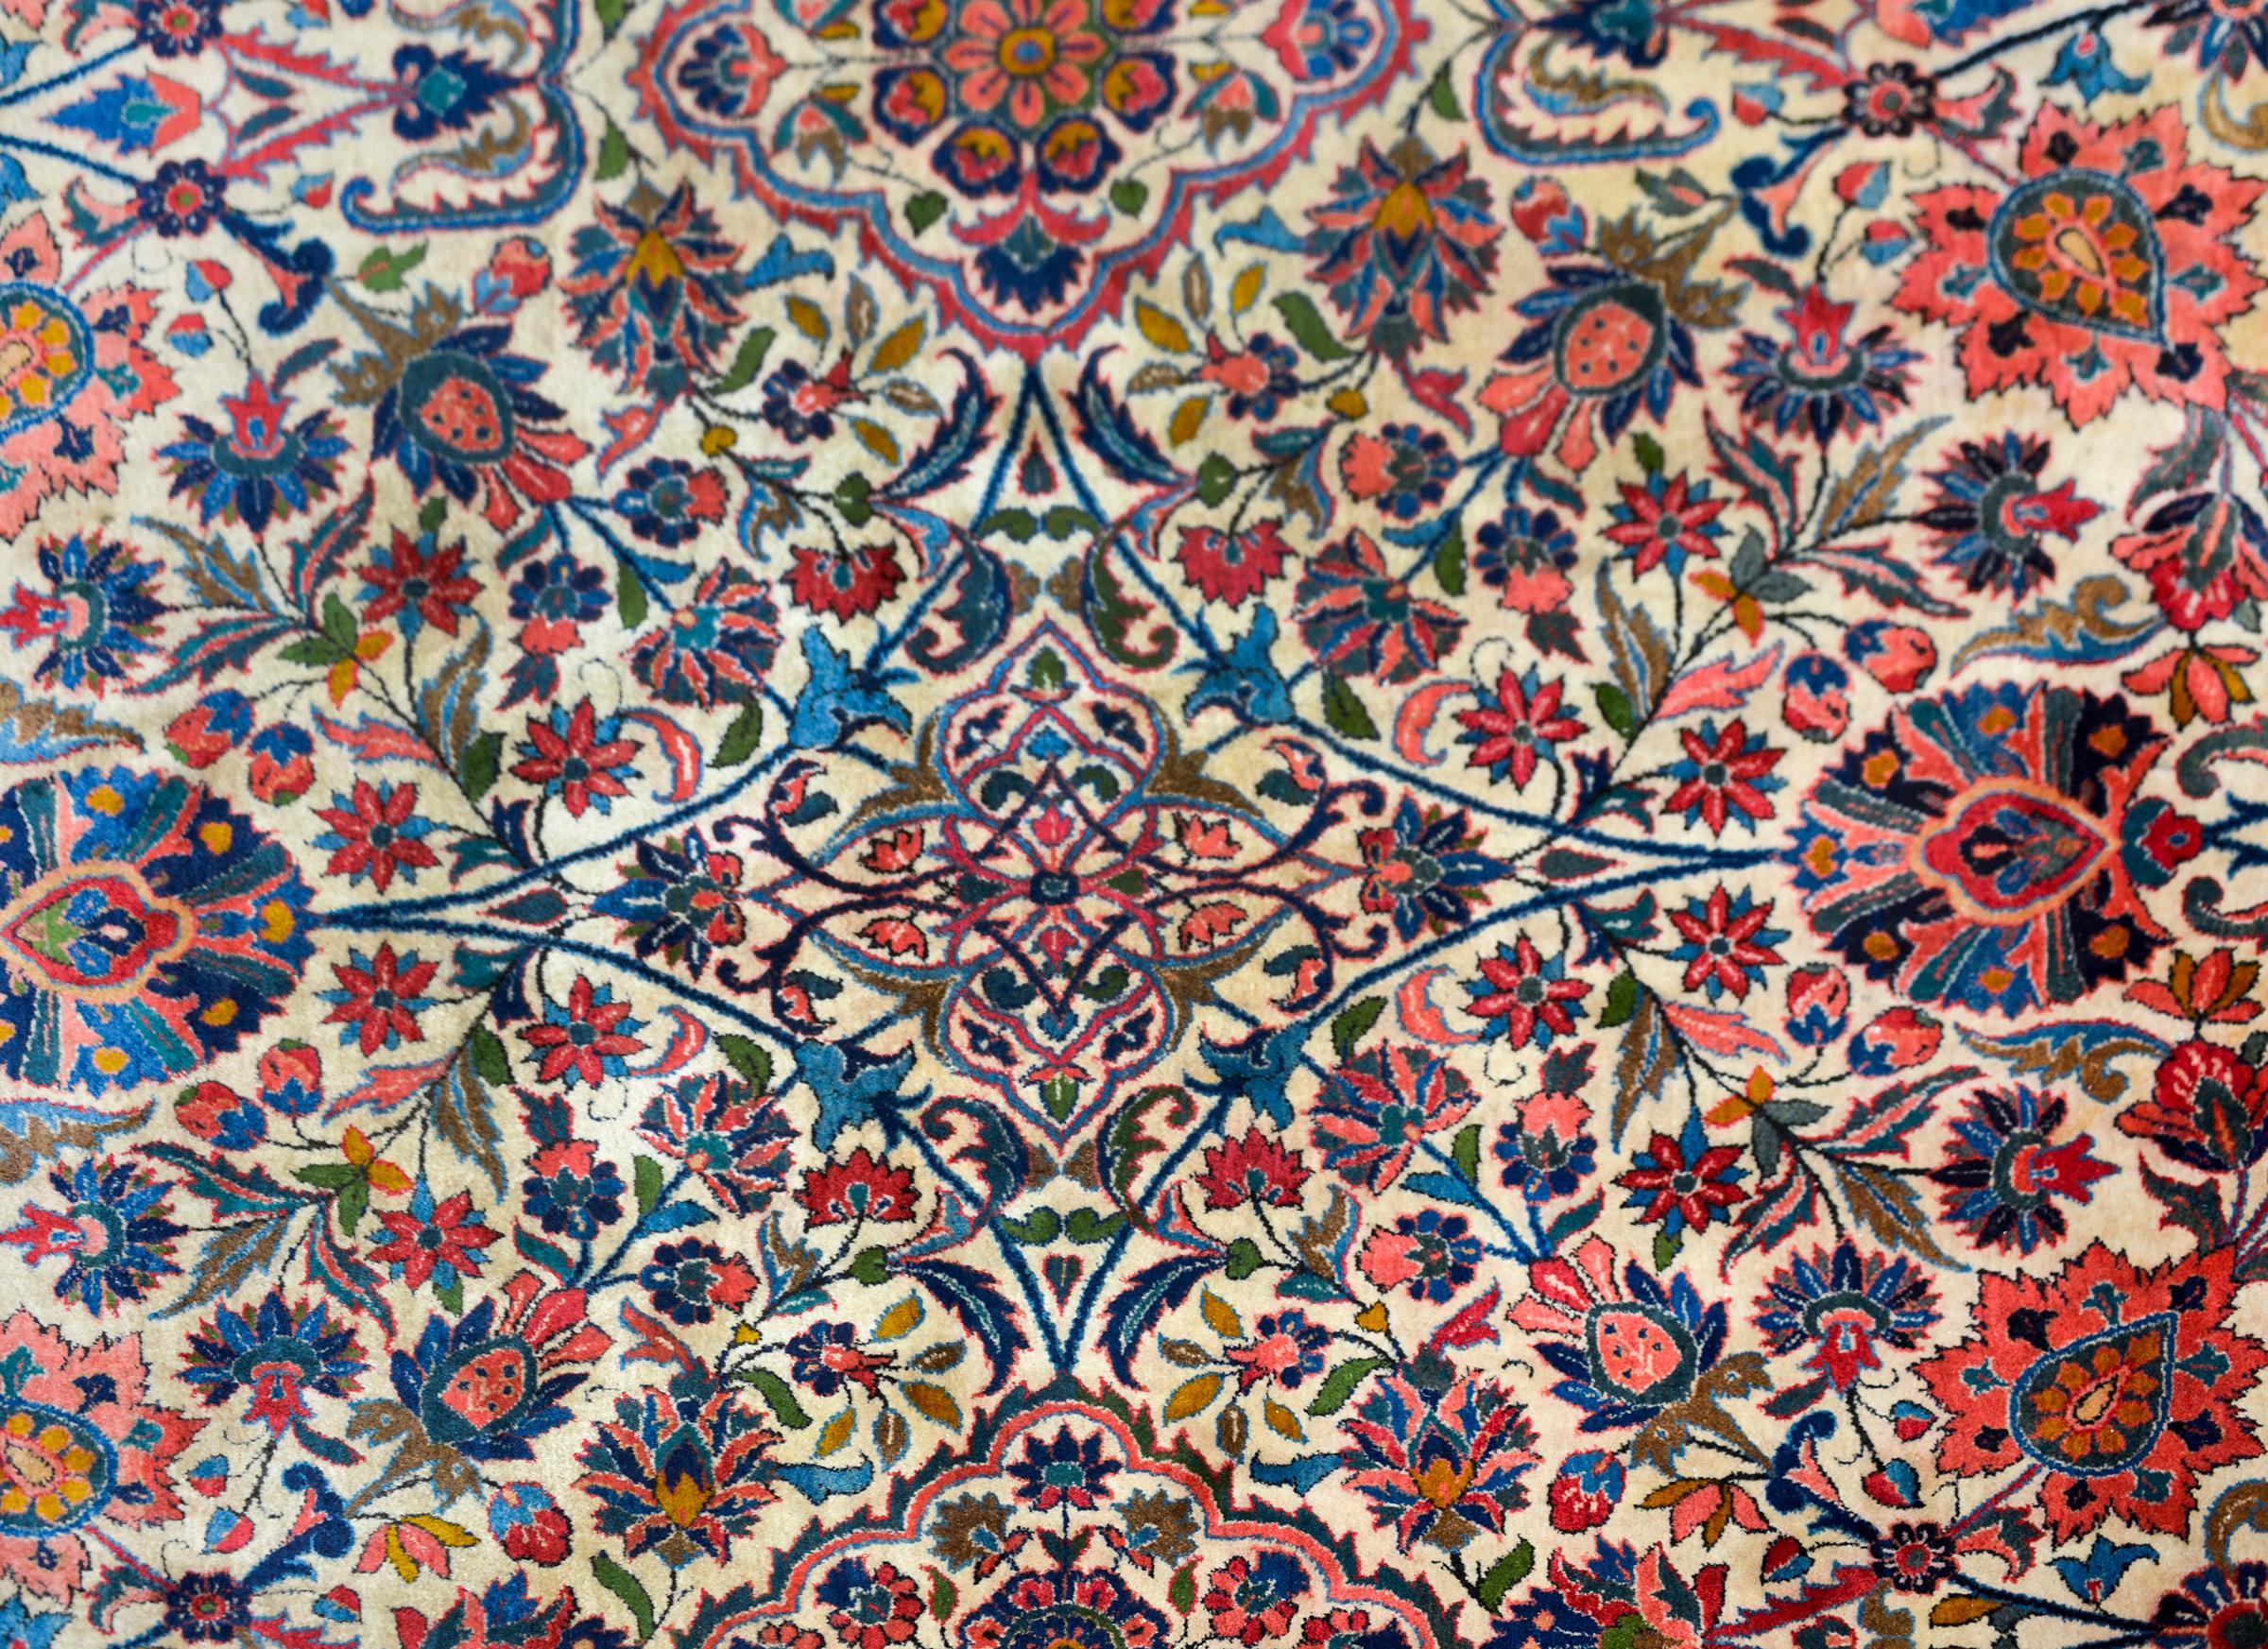 Wool Early 20th Century Persian Kashan Rug For Sale